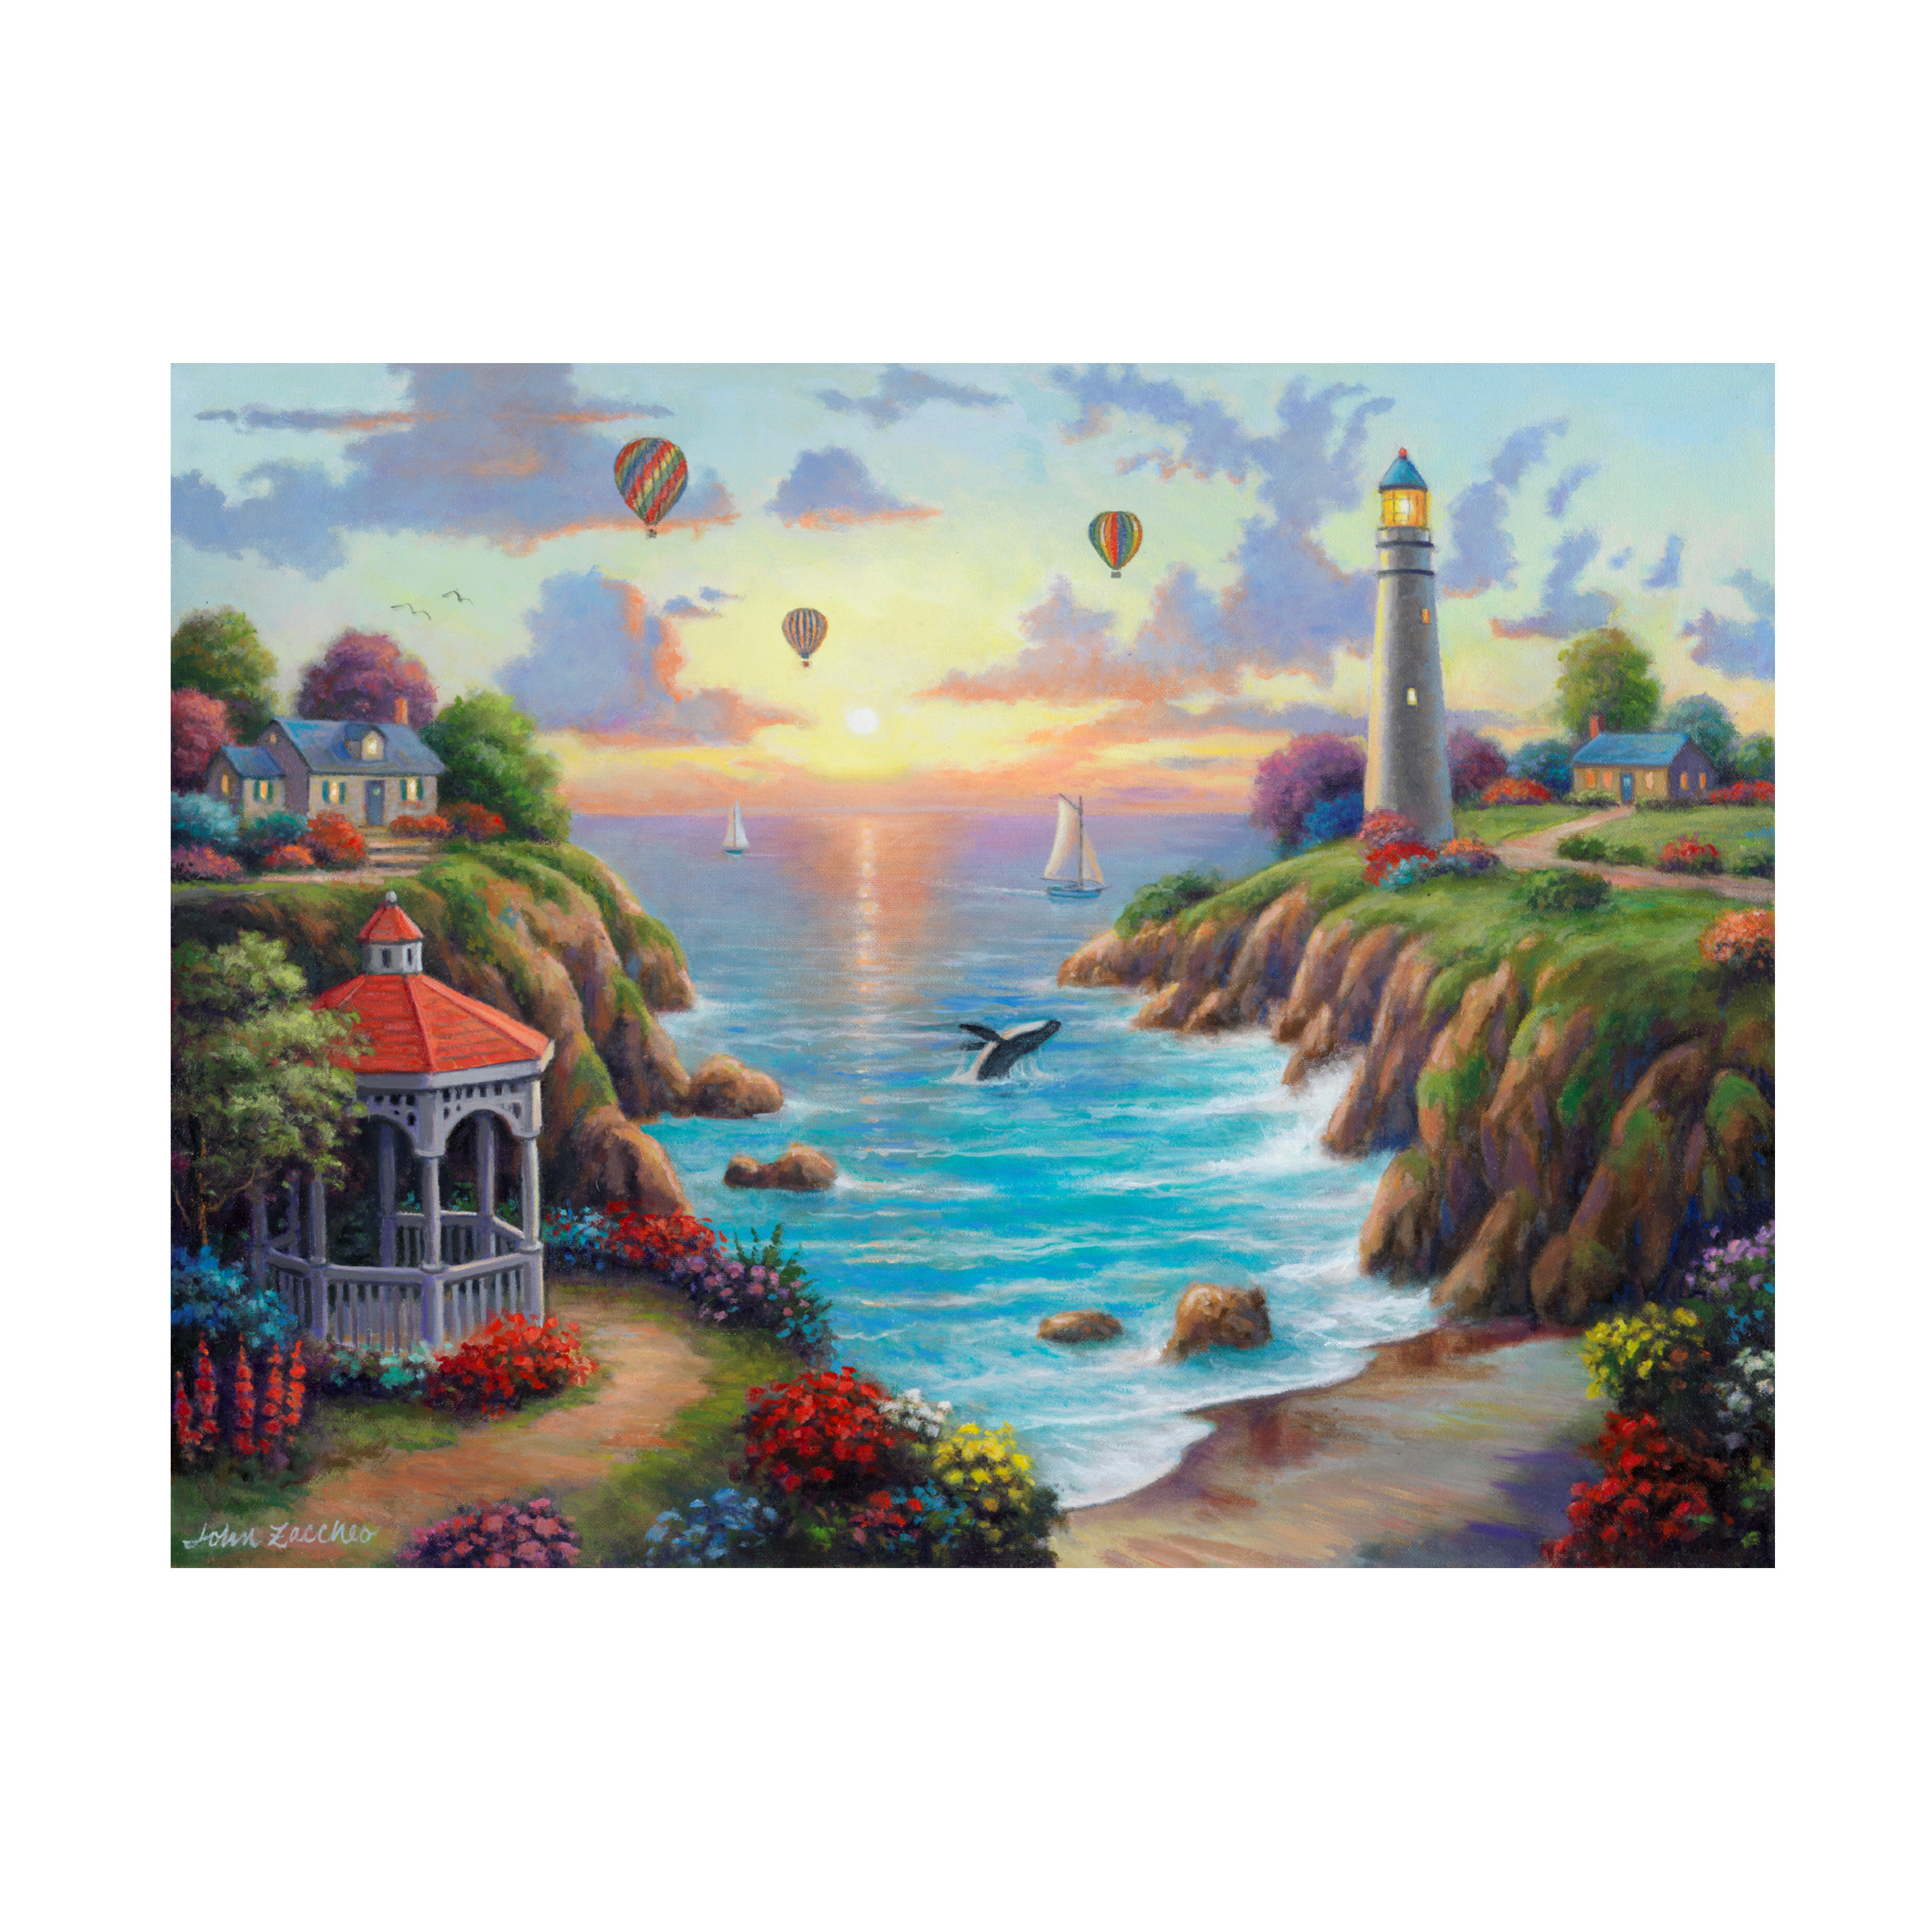 Sunset Over Paradise Cove On Canvas by John Zaccheo Print Breakwater Bay Size: 18 H x 24 W x 2 D